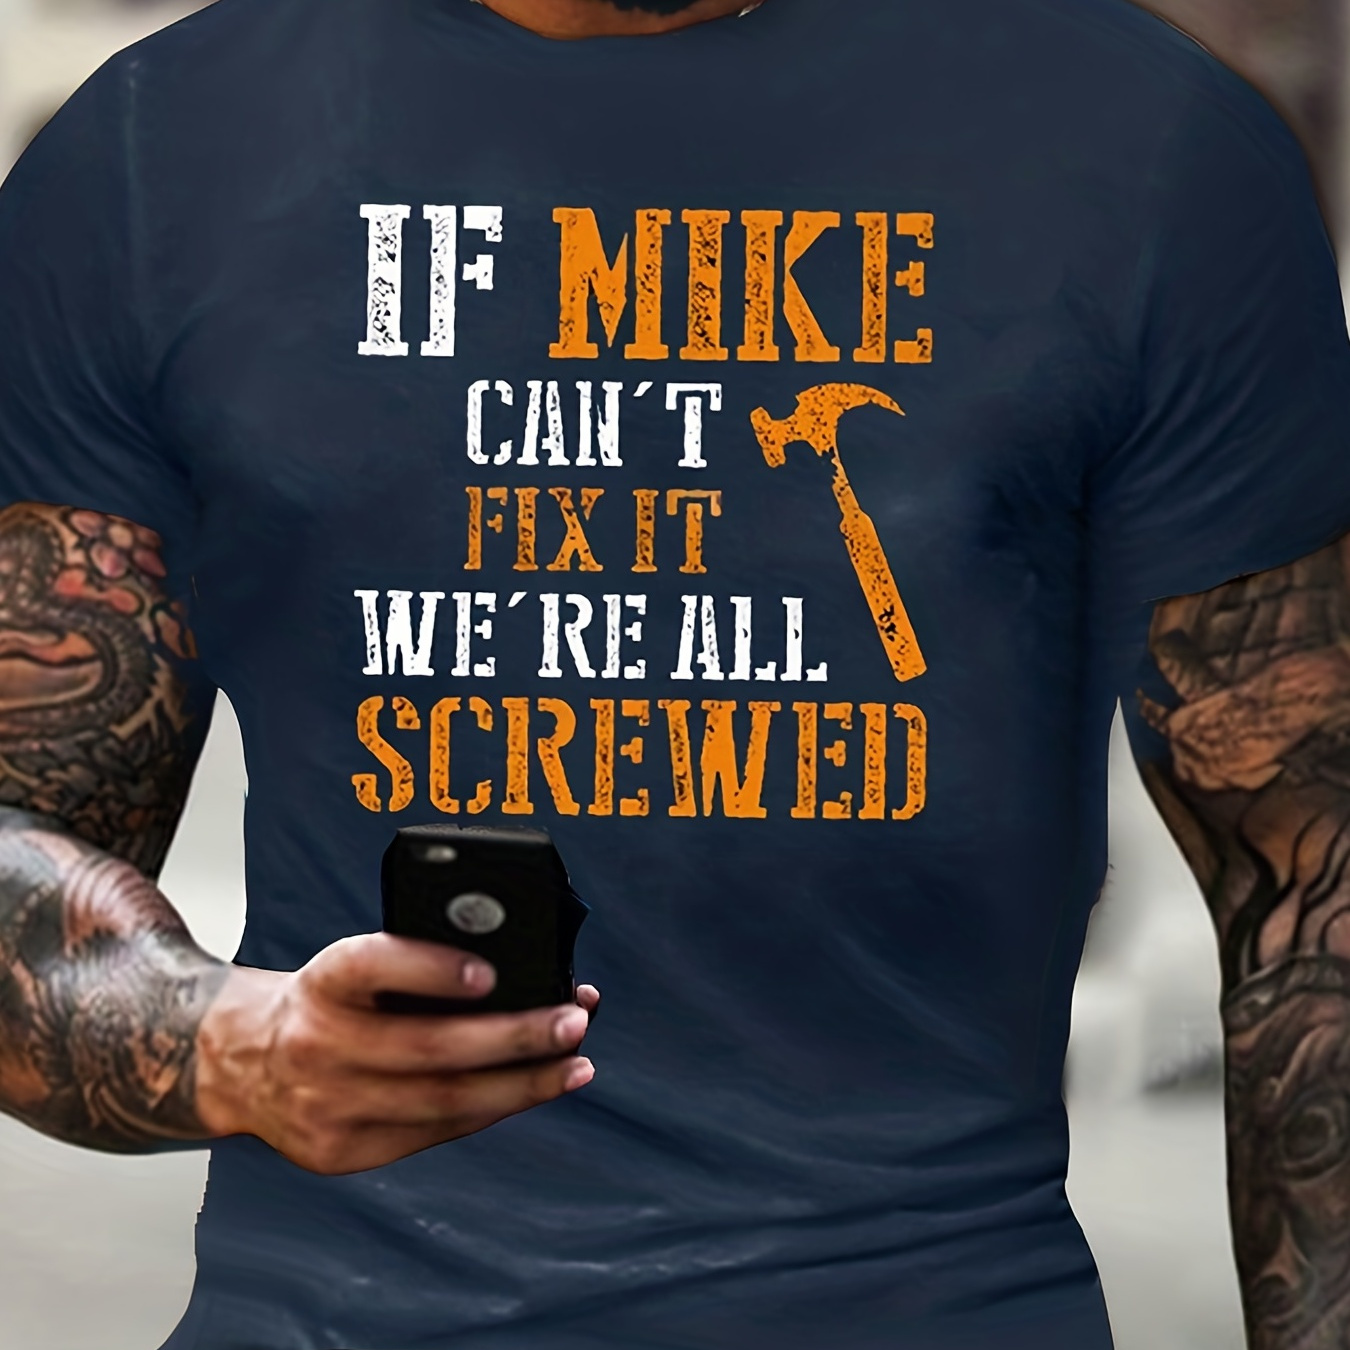 

Men's Hammer Pattern And Letter Print "if Mike Can't Fix It We're All Screwed" T-shirt With Crew Neck And Short Sleeve, Tees For Men, Casual And Stylish Tops For Summer Outdoors Wear